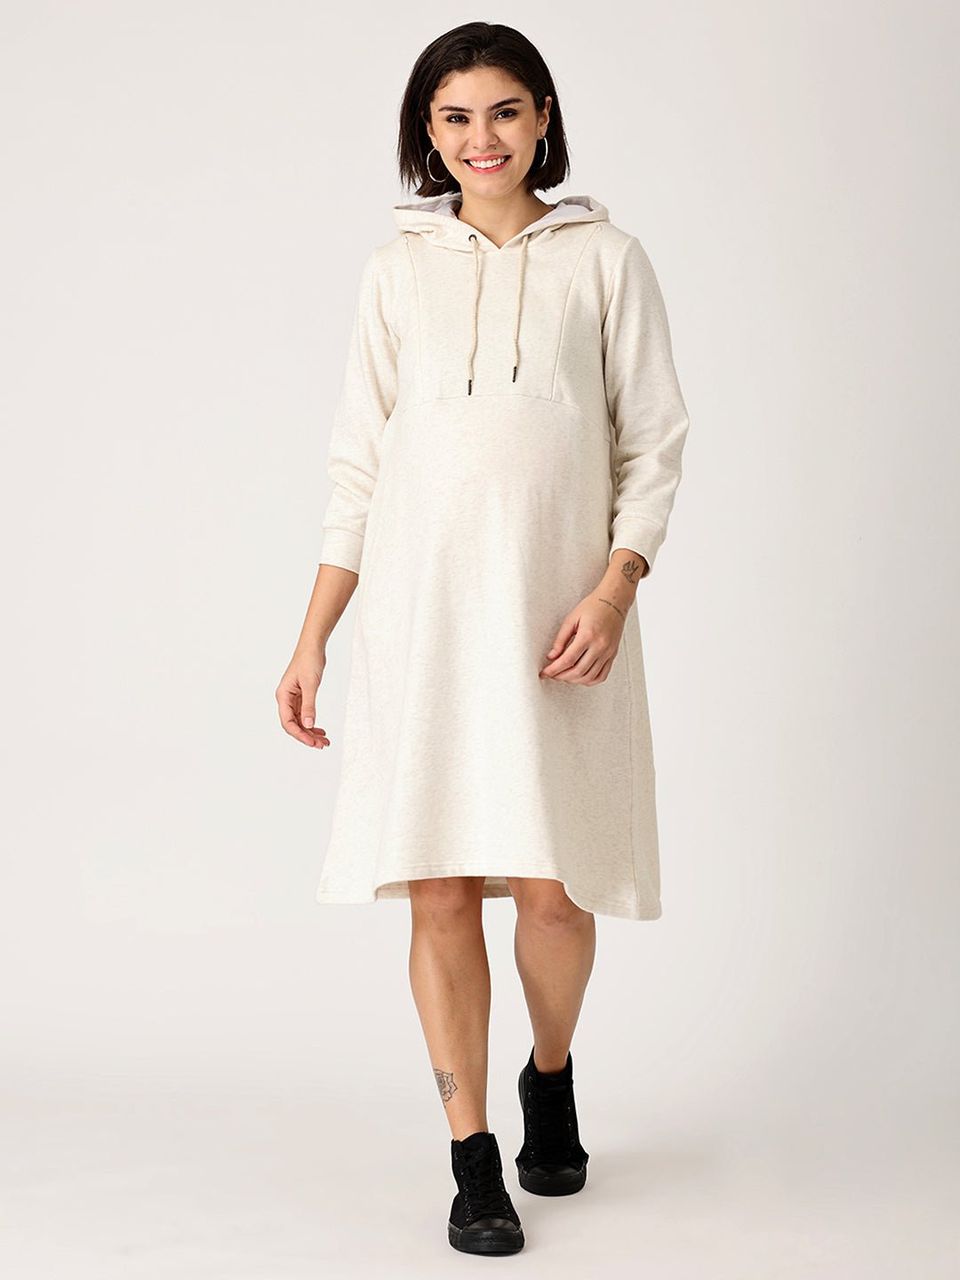 The Mom Store Cloud Dancer Maternity Sweater Hoodie Dress With Nursing